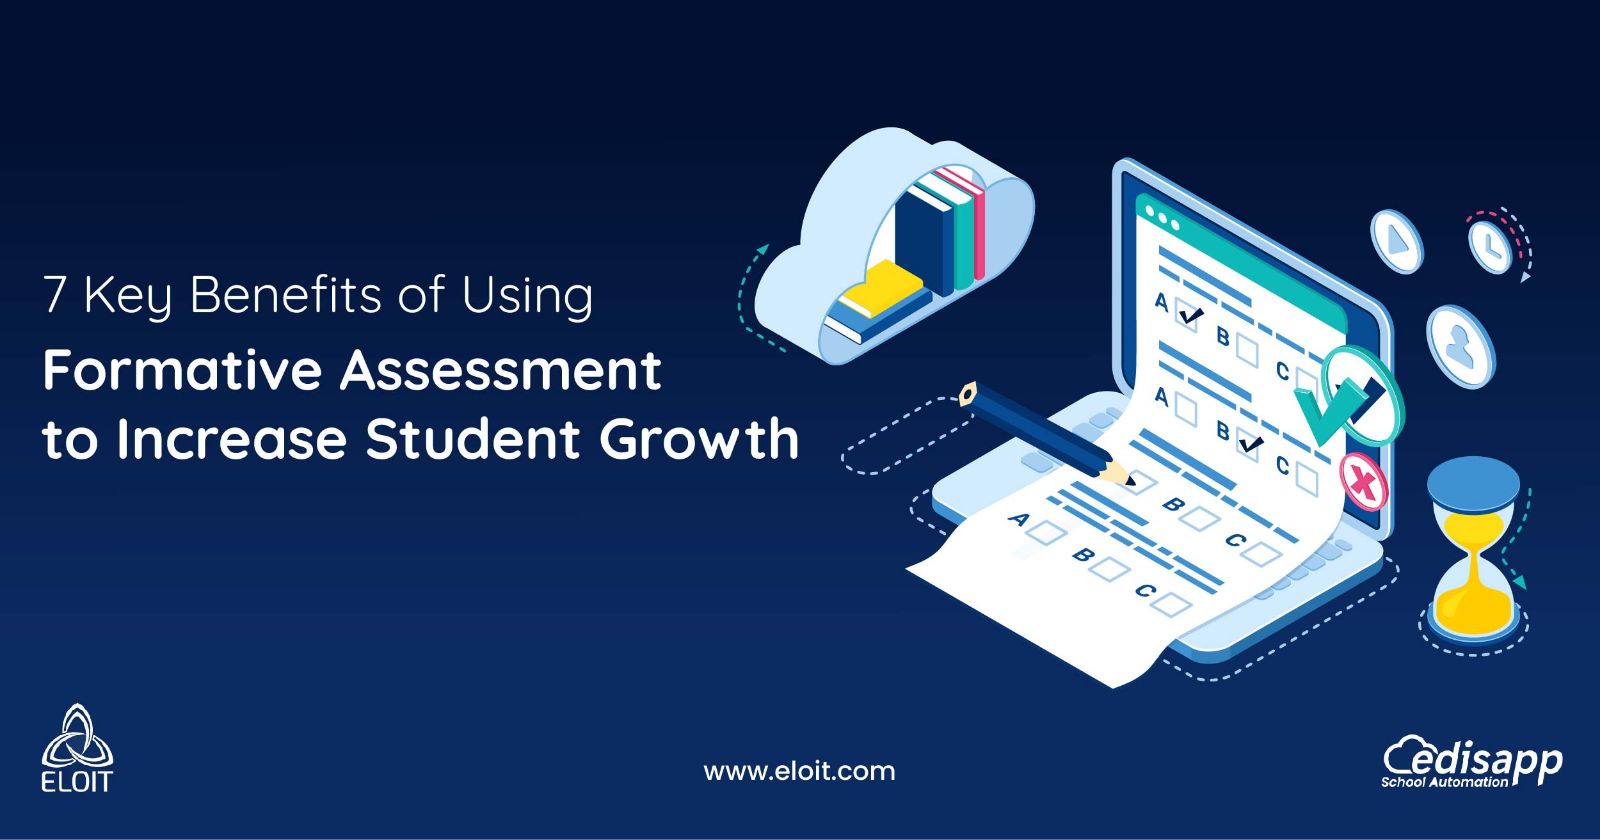 7 Key Benefits of Using Formative Assessment to Increase Student Growth